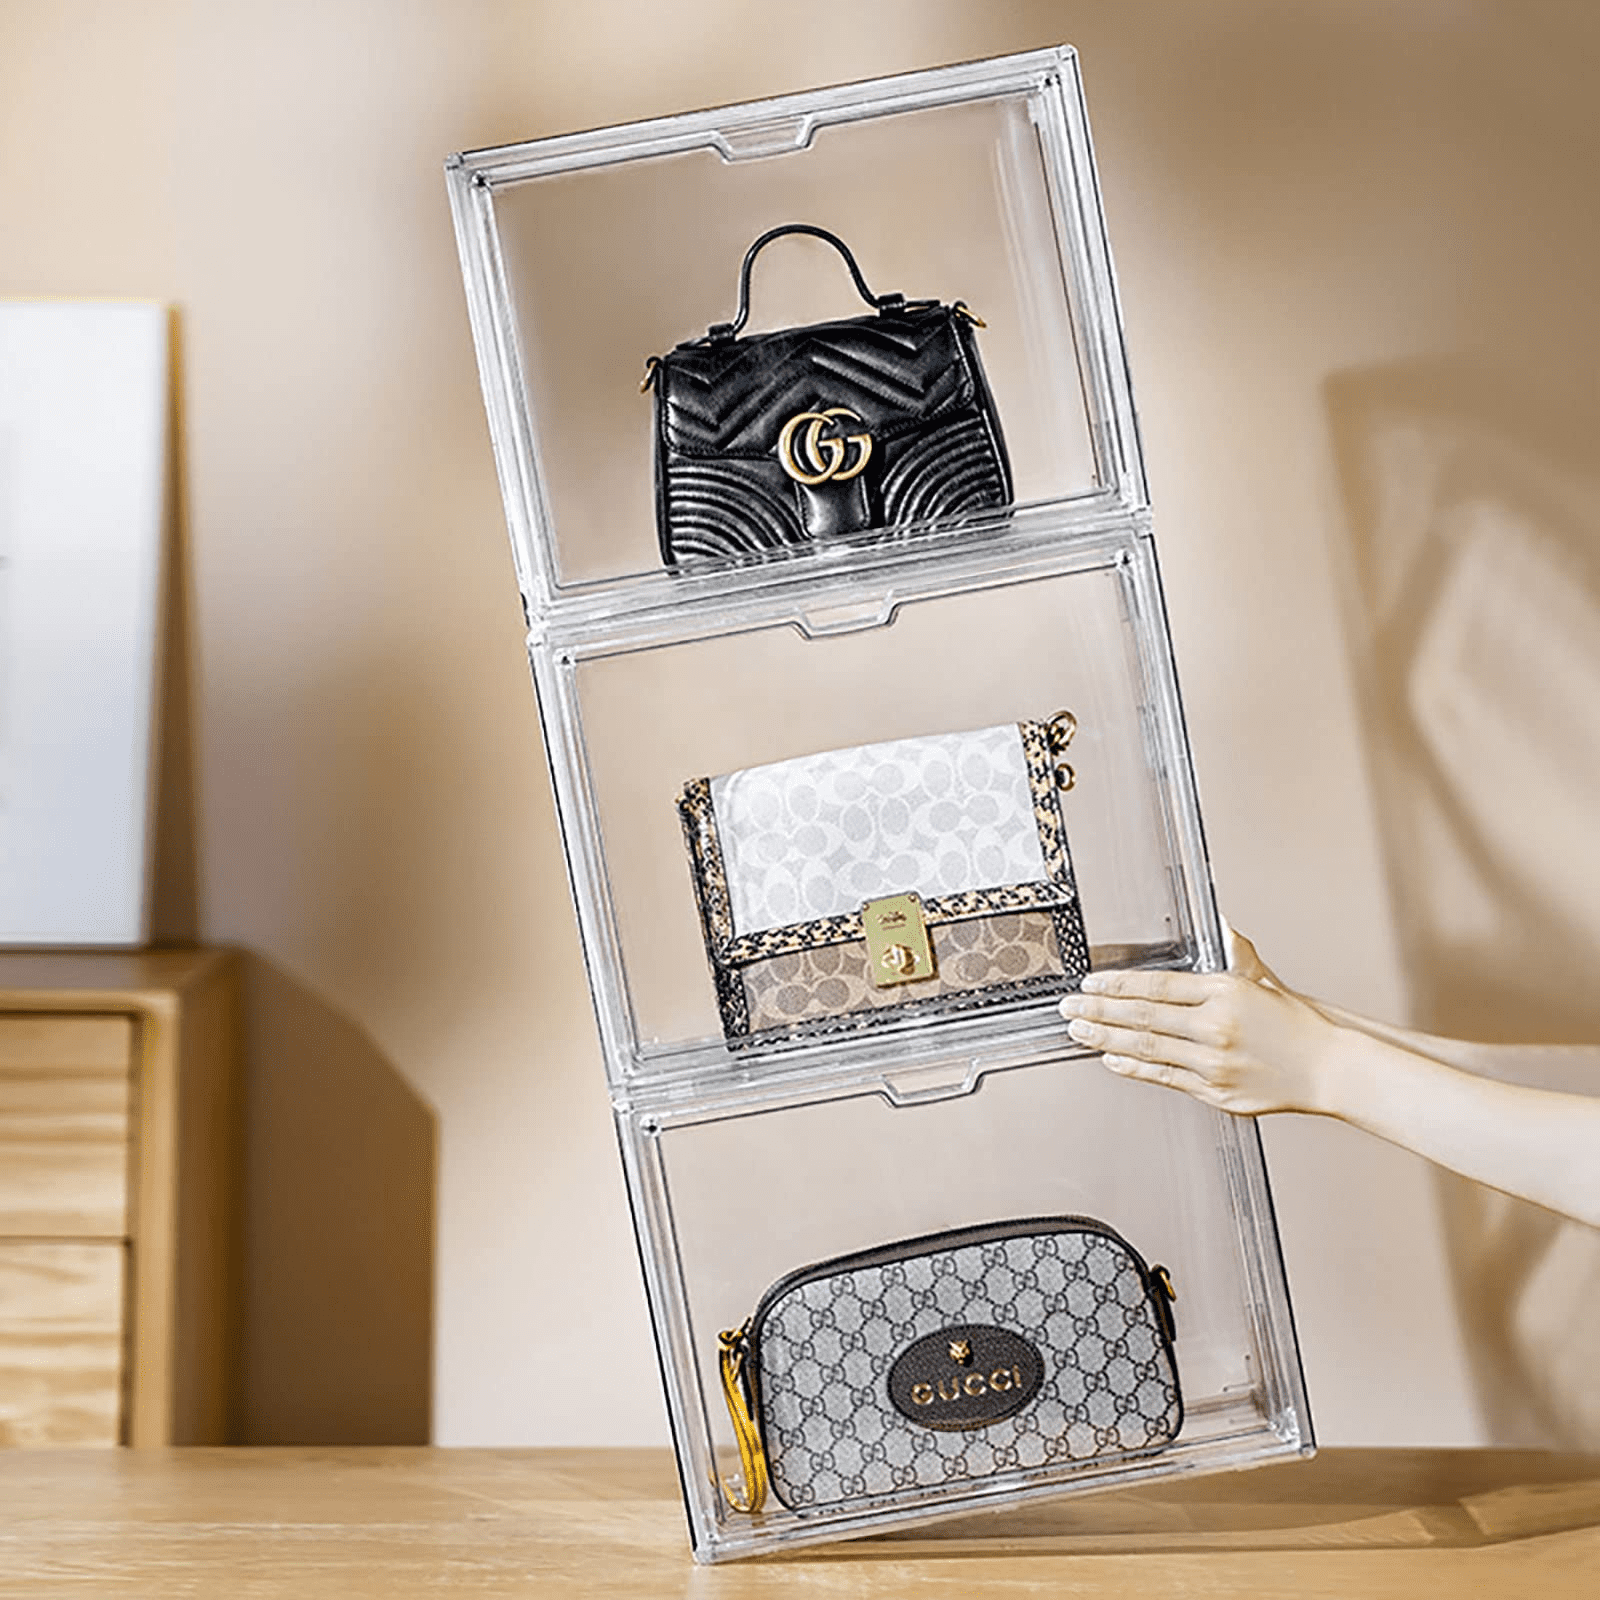  MSHOMELY Clear Purse Storage Organizer for Closet, 3Packs  Handbag Storage Organizer, Acrylic Display Case for Purse/Handbag,  Stackable Bag Organizer with Magnetic Door for Wallet, Clutch, Hats, Toys :  Home & Kitchen